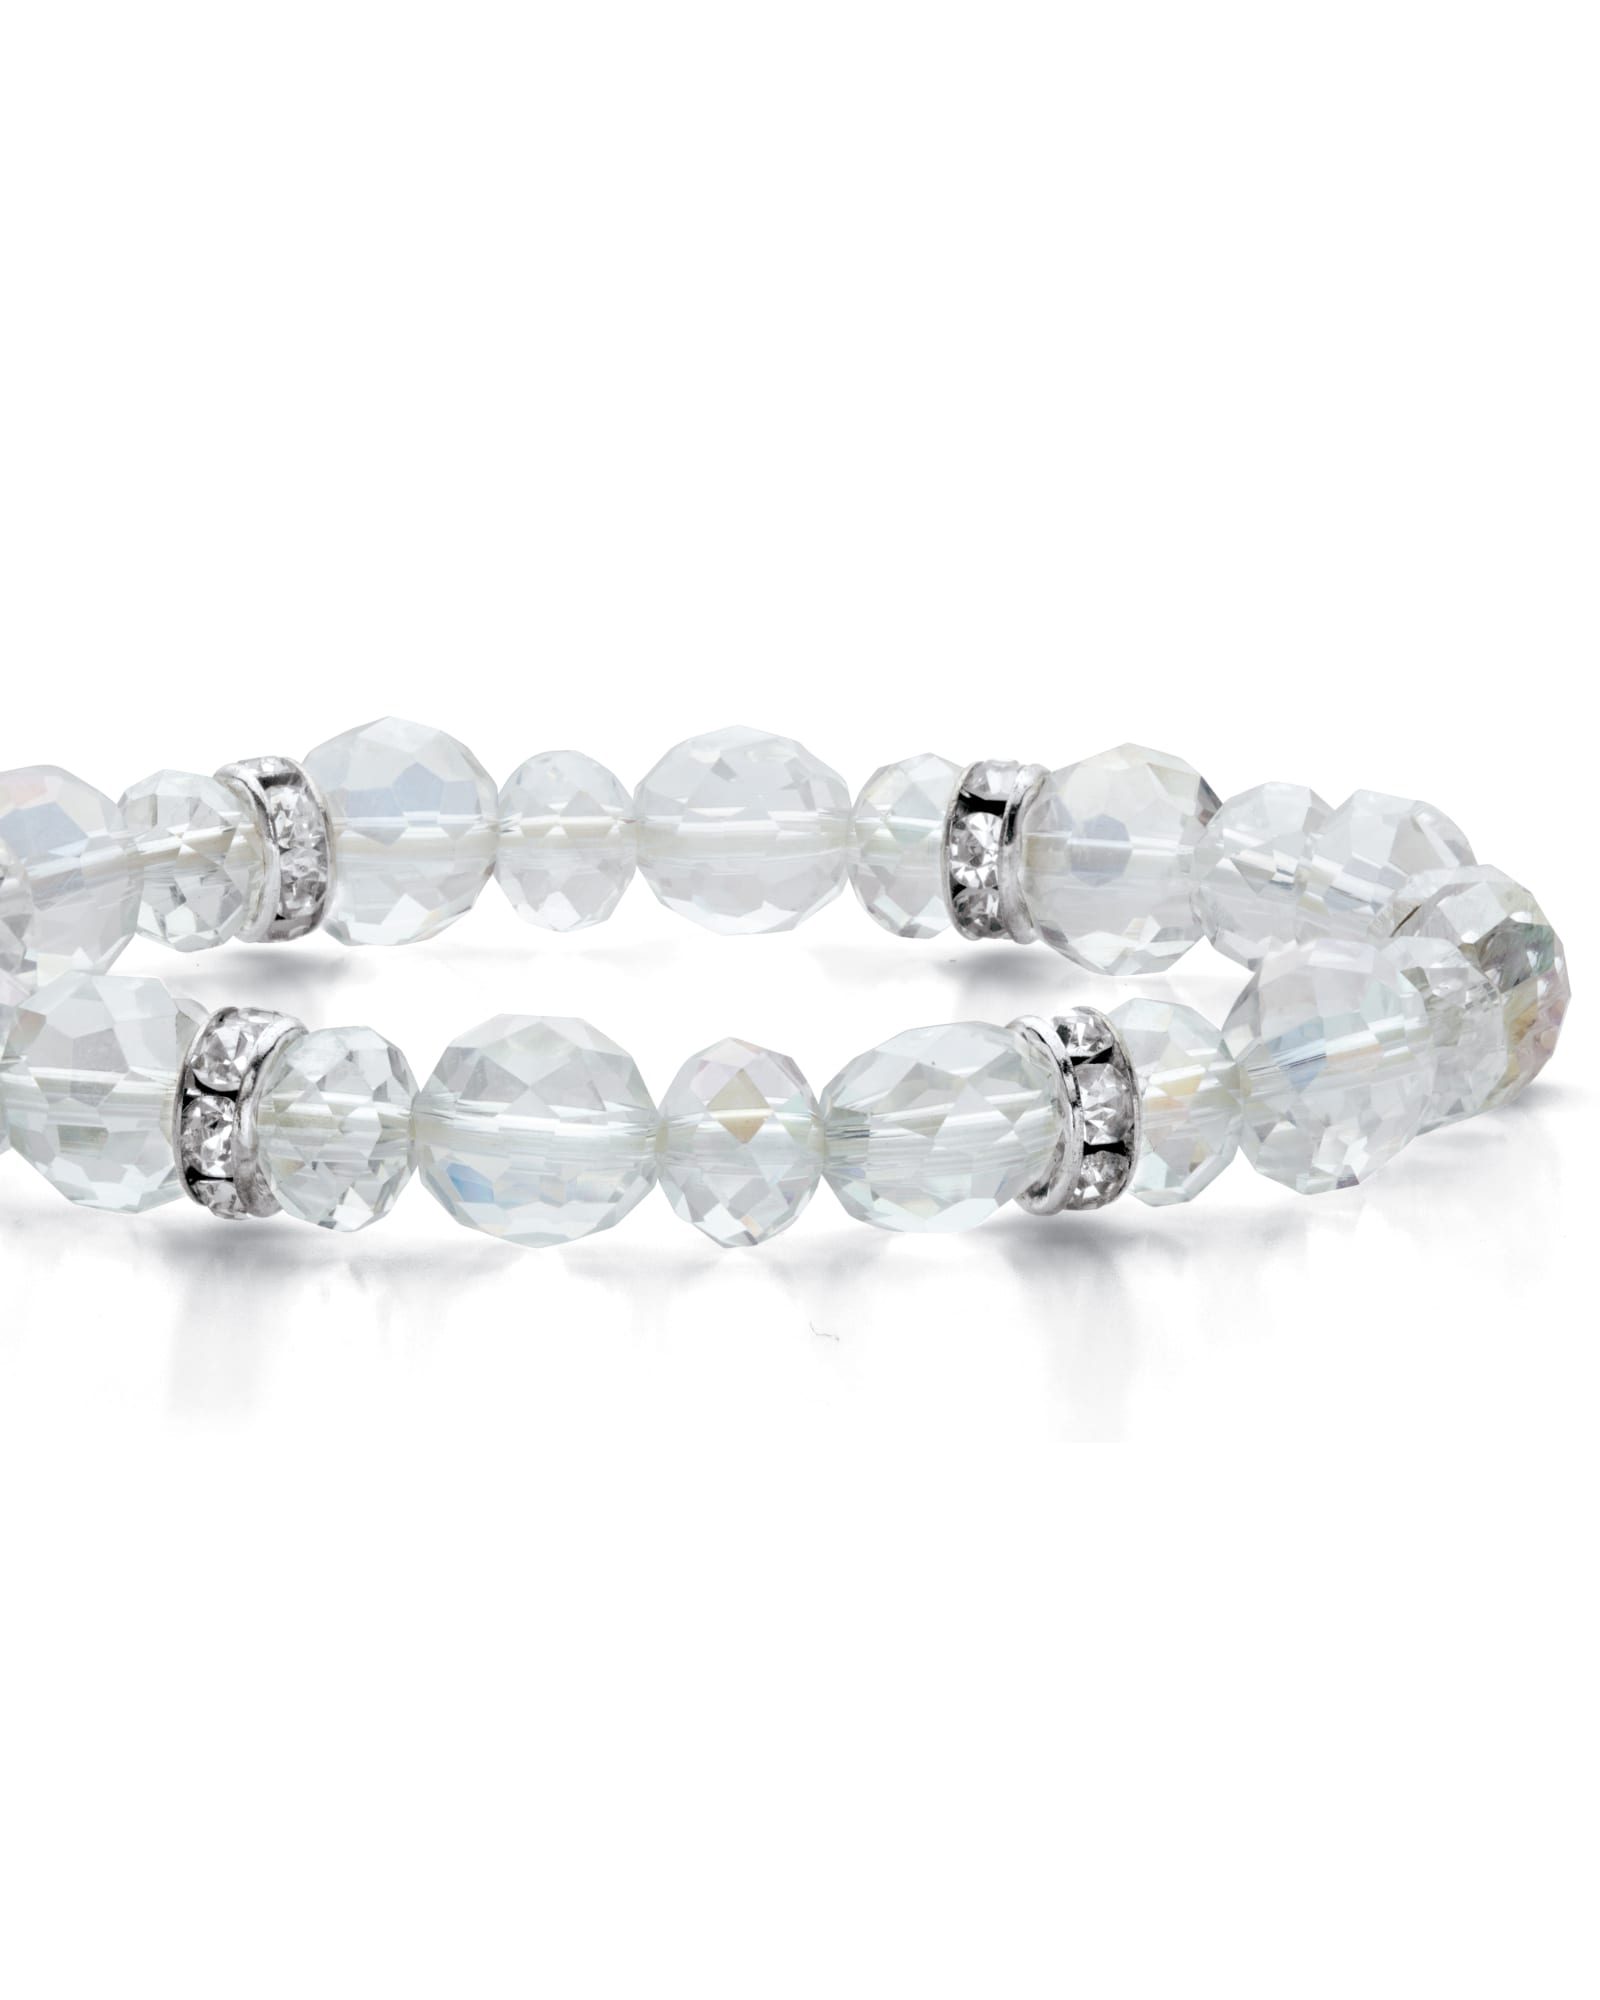 Crystal Accent Silvertone Beaded Faceted Stretch Bracelet 7